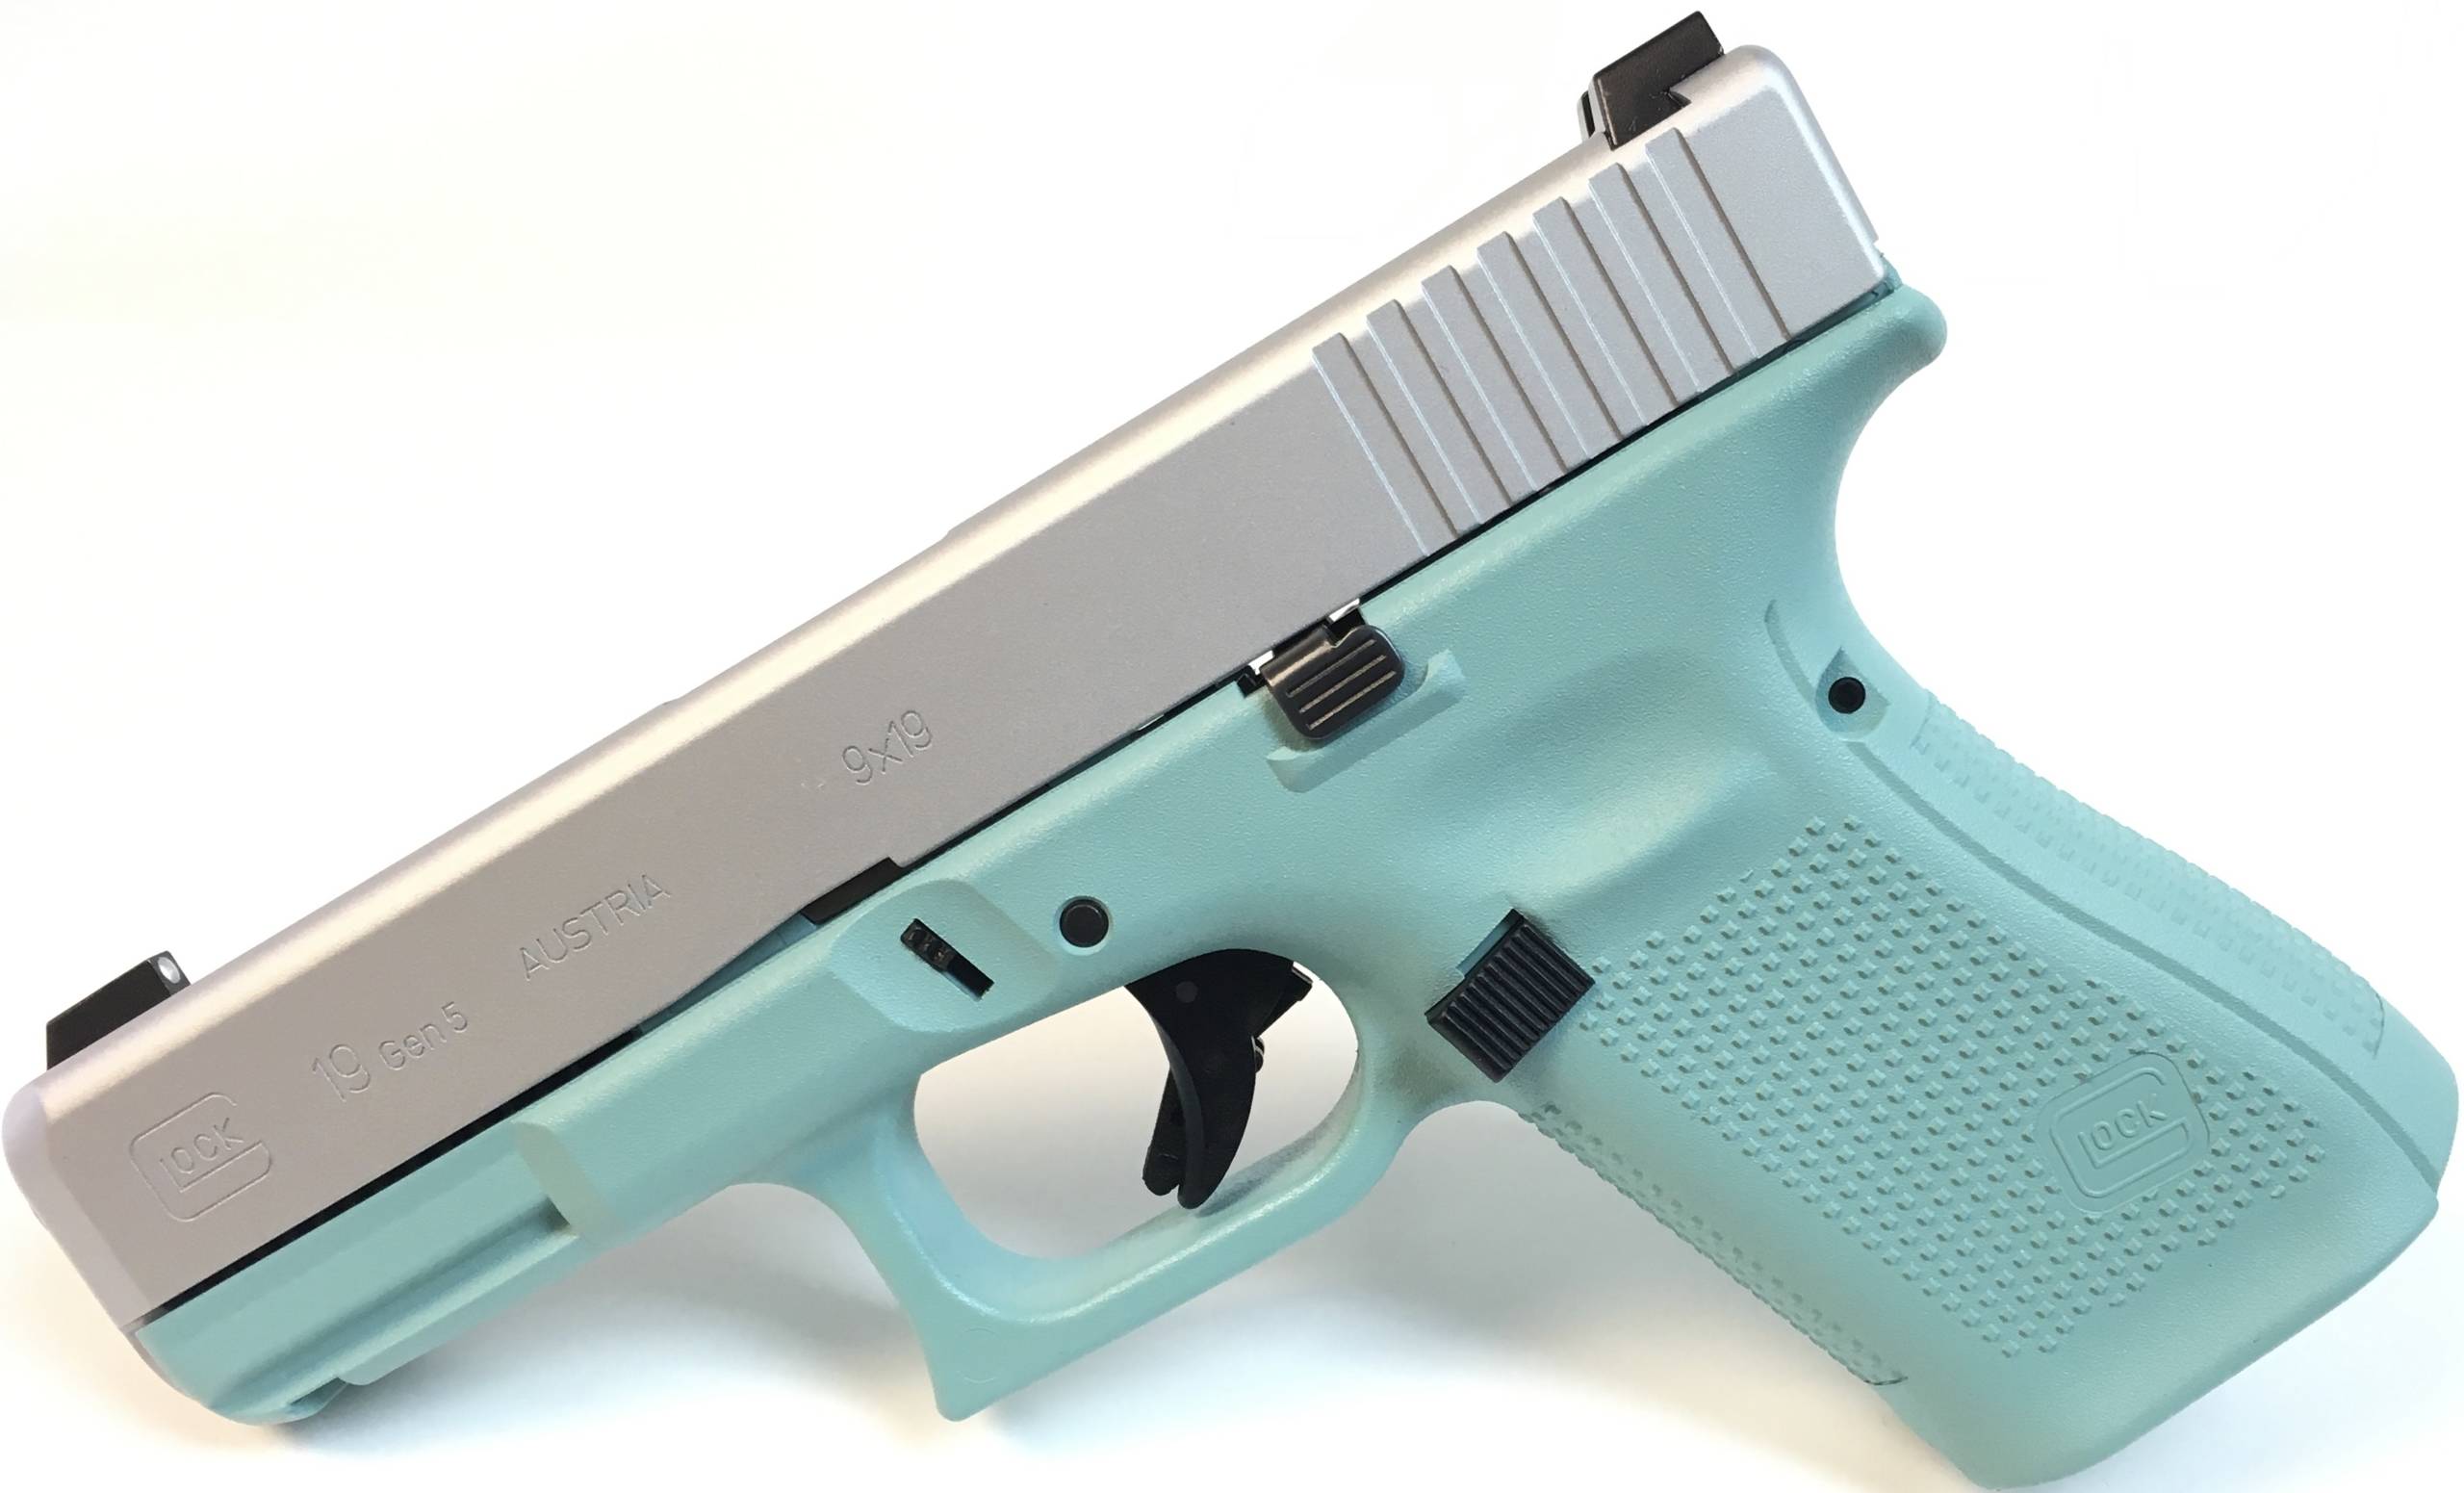 TZ Armory Diamond Blue and Stainless Glock 19 Gen5 for sale.